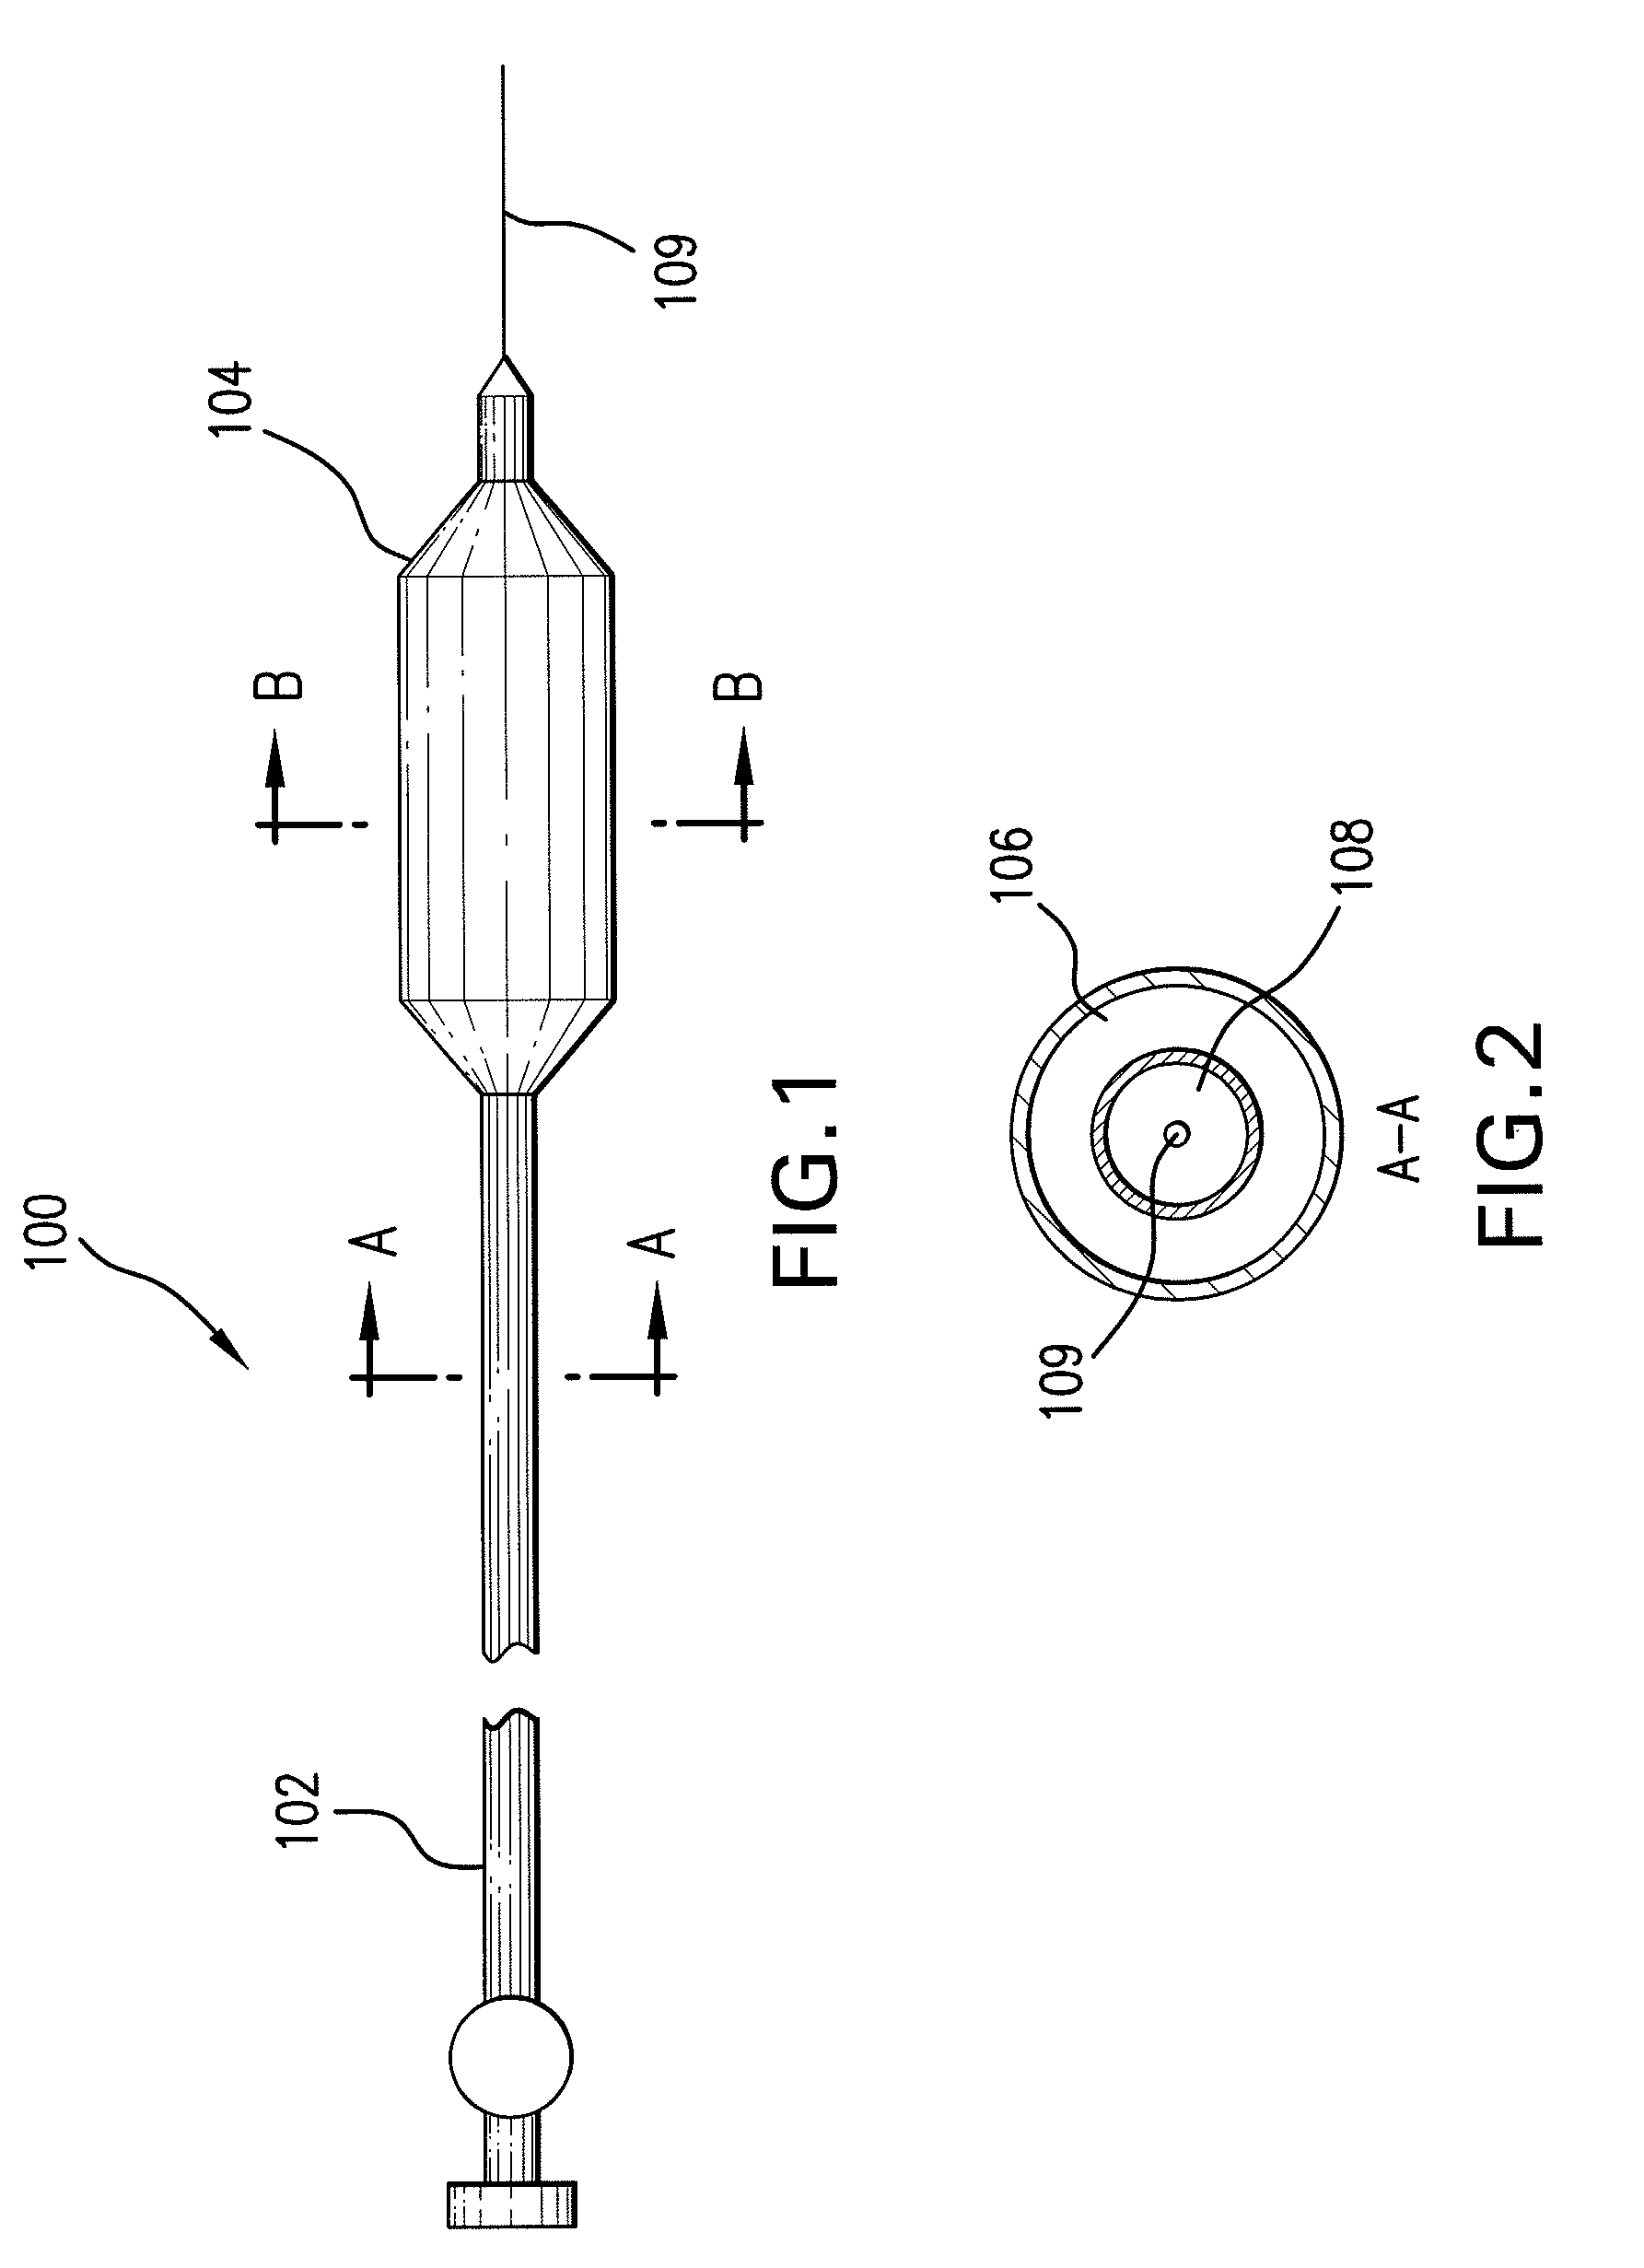 Expandable Member Having A Covering Formed Of A Fibrous Matrix For Intraluminal Drug Delivery